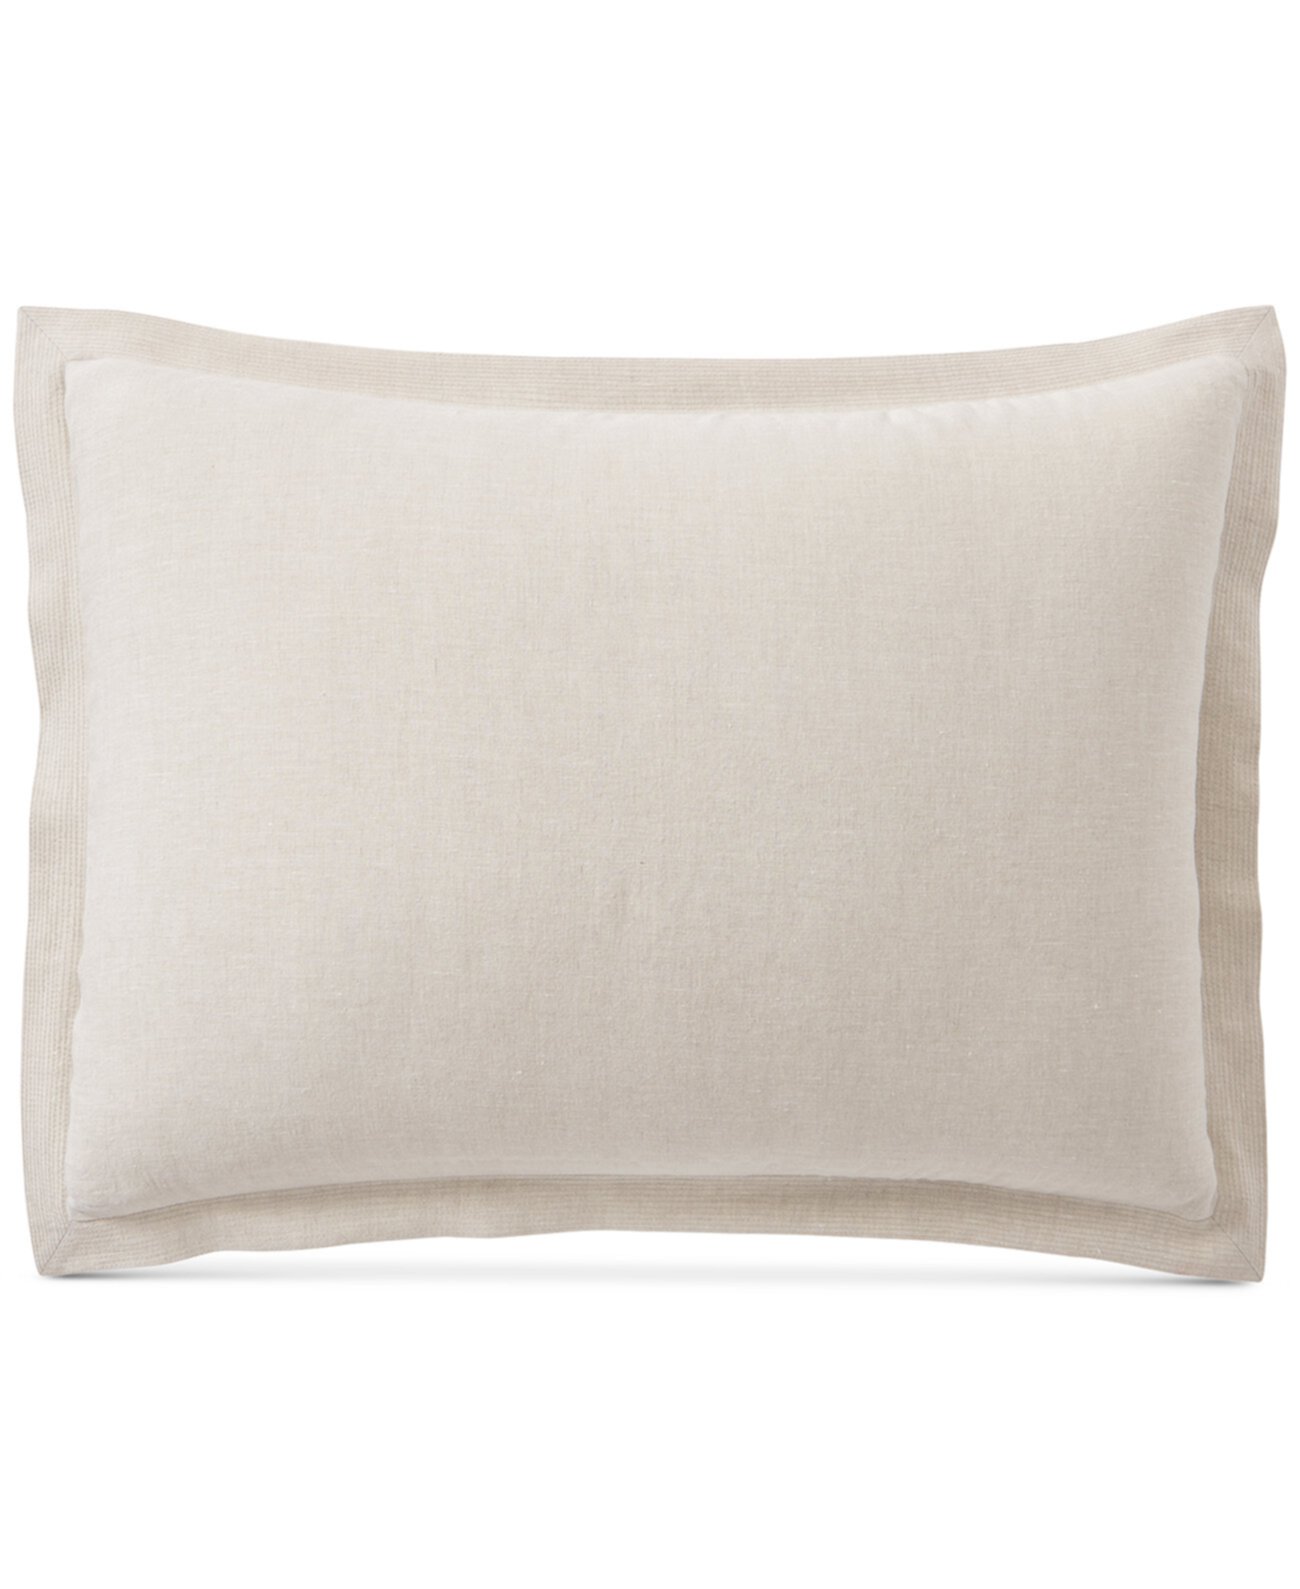 Linen Standard Sham, Created for Macy's Hotel Collection